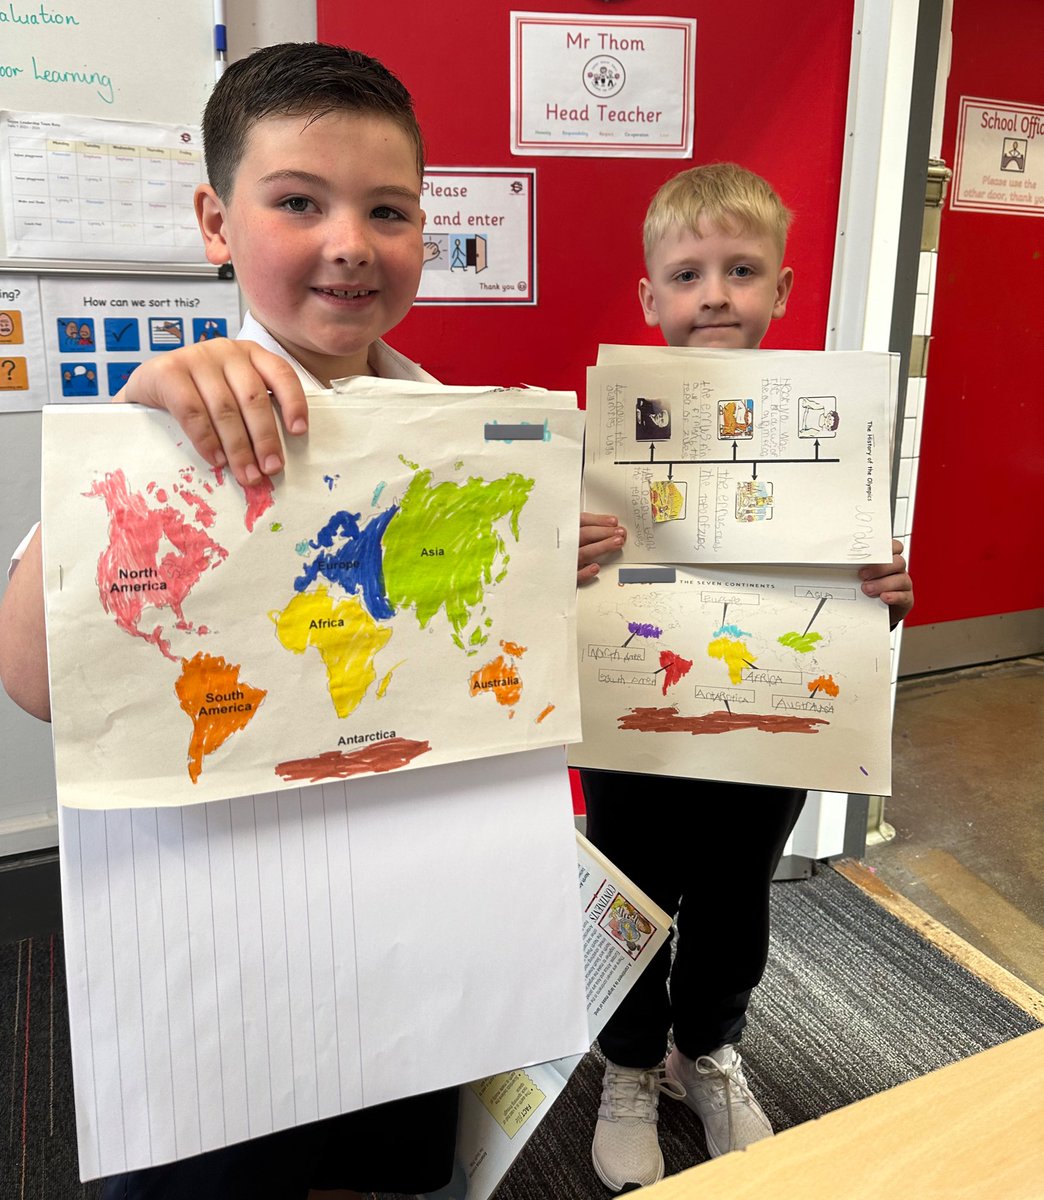 As part of their learning about the upcoming Olympic Games, P2 used World Atlases to identify continents 🌎